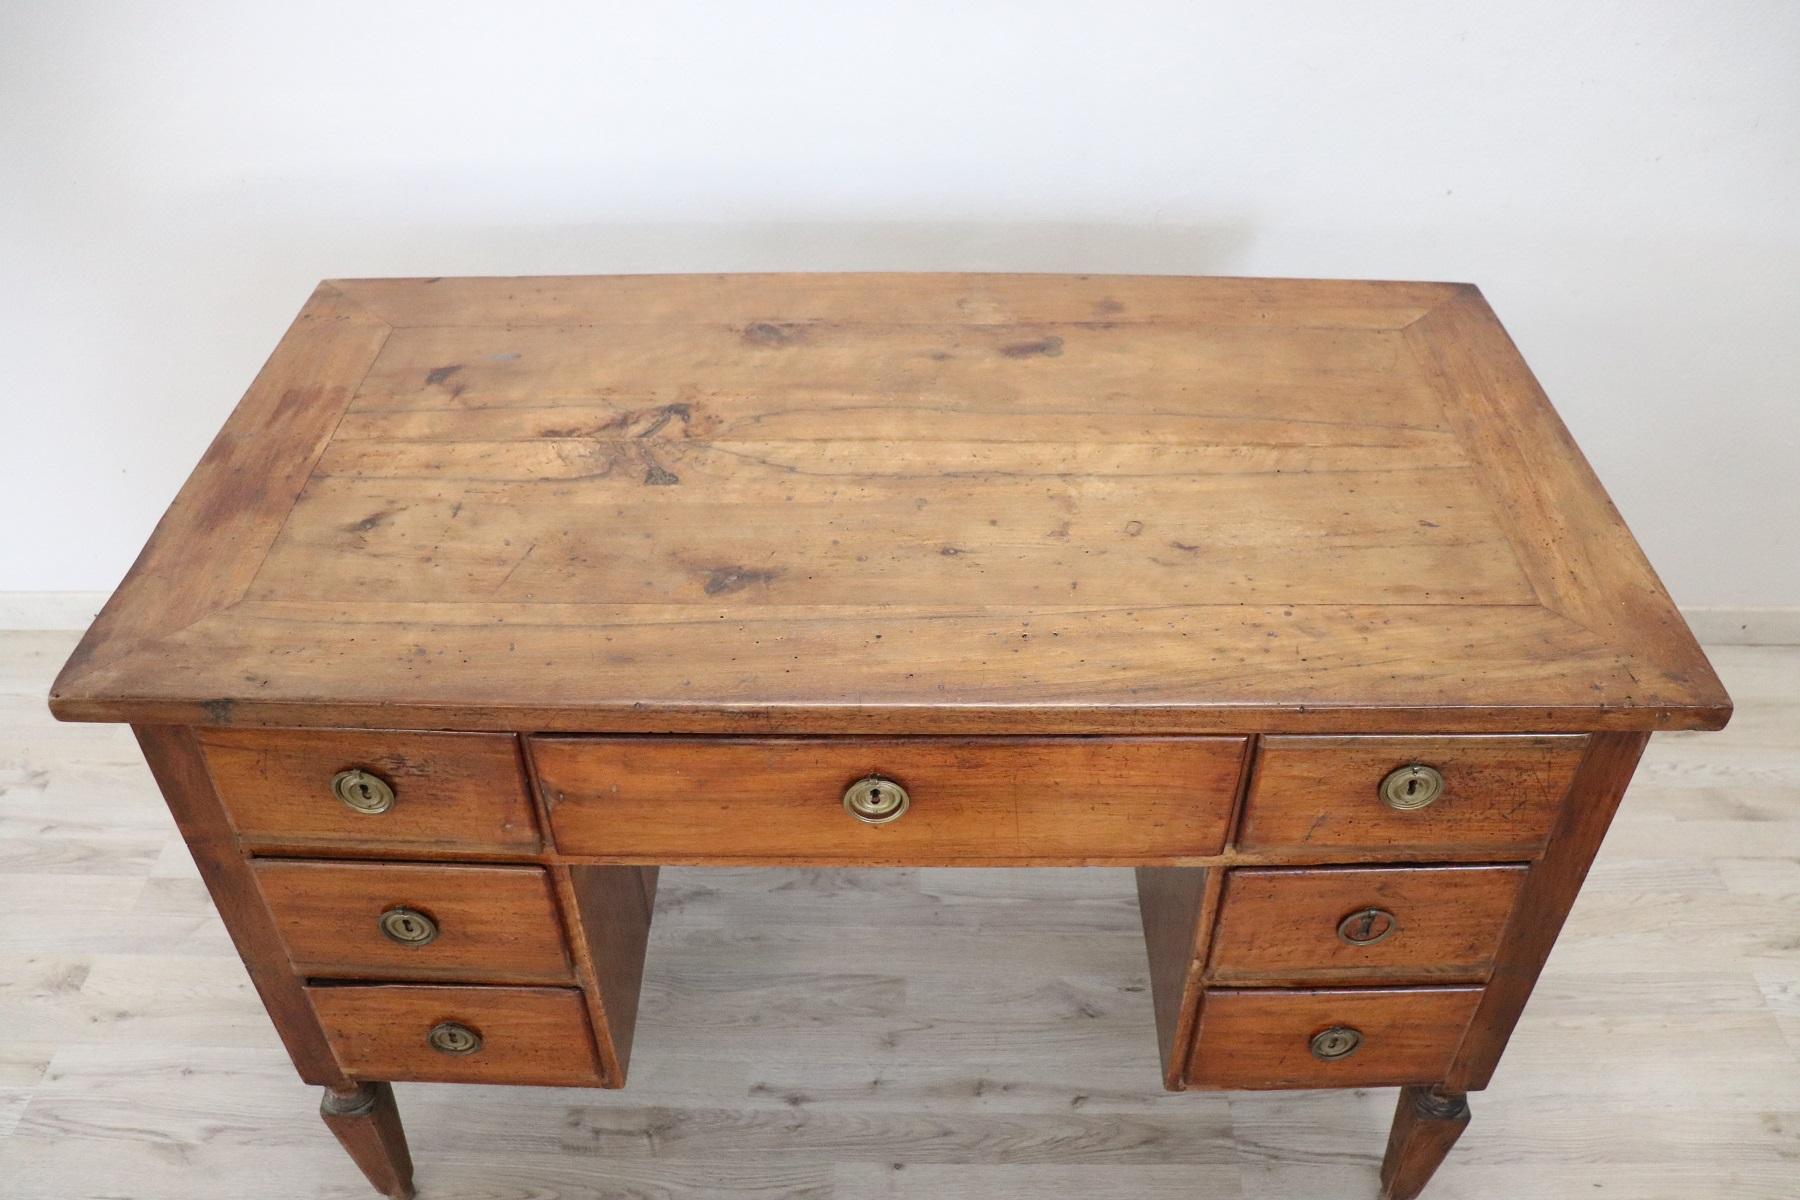 Elegant antique Italian Louis XVI writing desk. The desk is made of walnut wood. Simple essential line with solid straight legs. Plenty of space for your writing needs and seven comfortable large drawers on the front. Finished on each side so it is